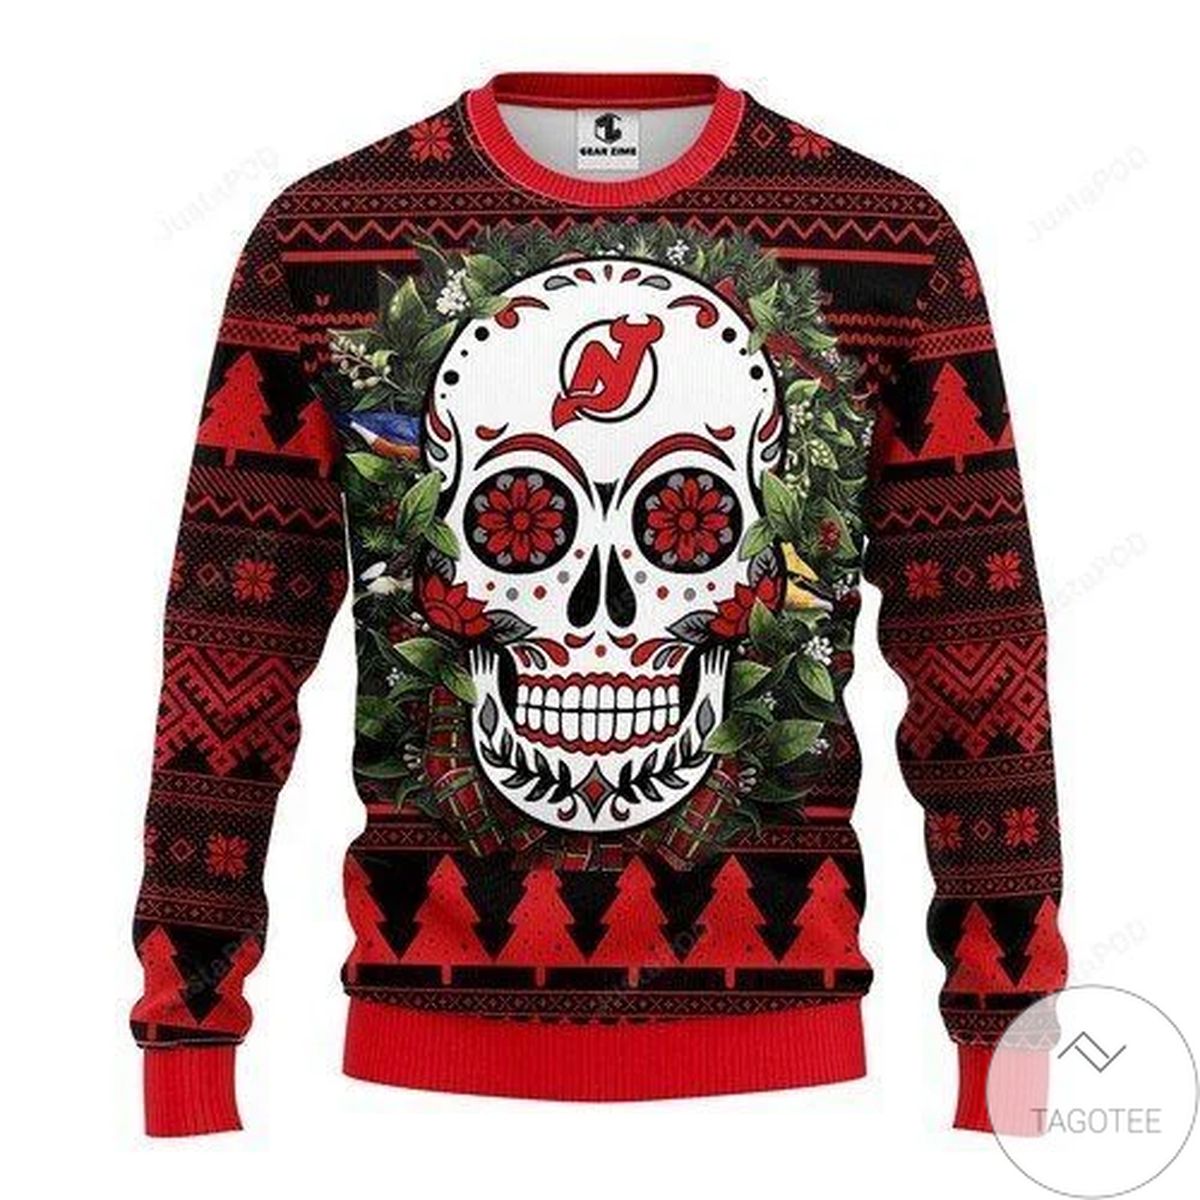 Nhl New Jersey Devils Groot Hug Ugly Christmas Sweater